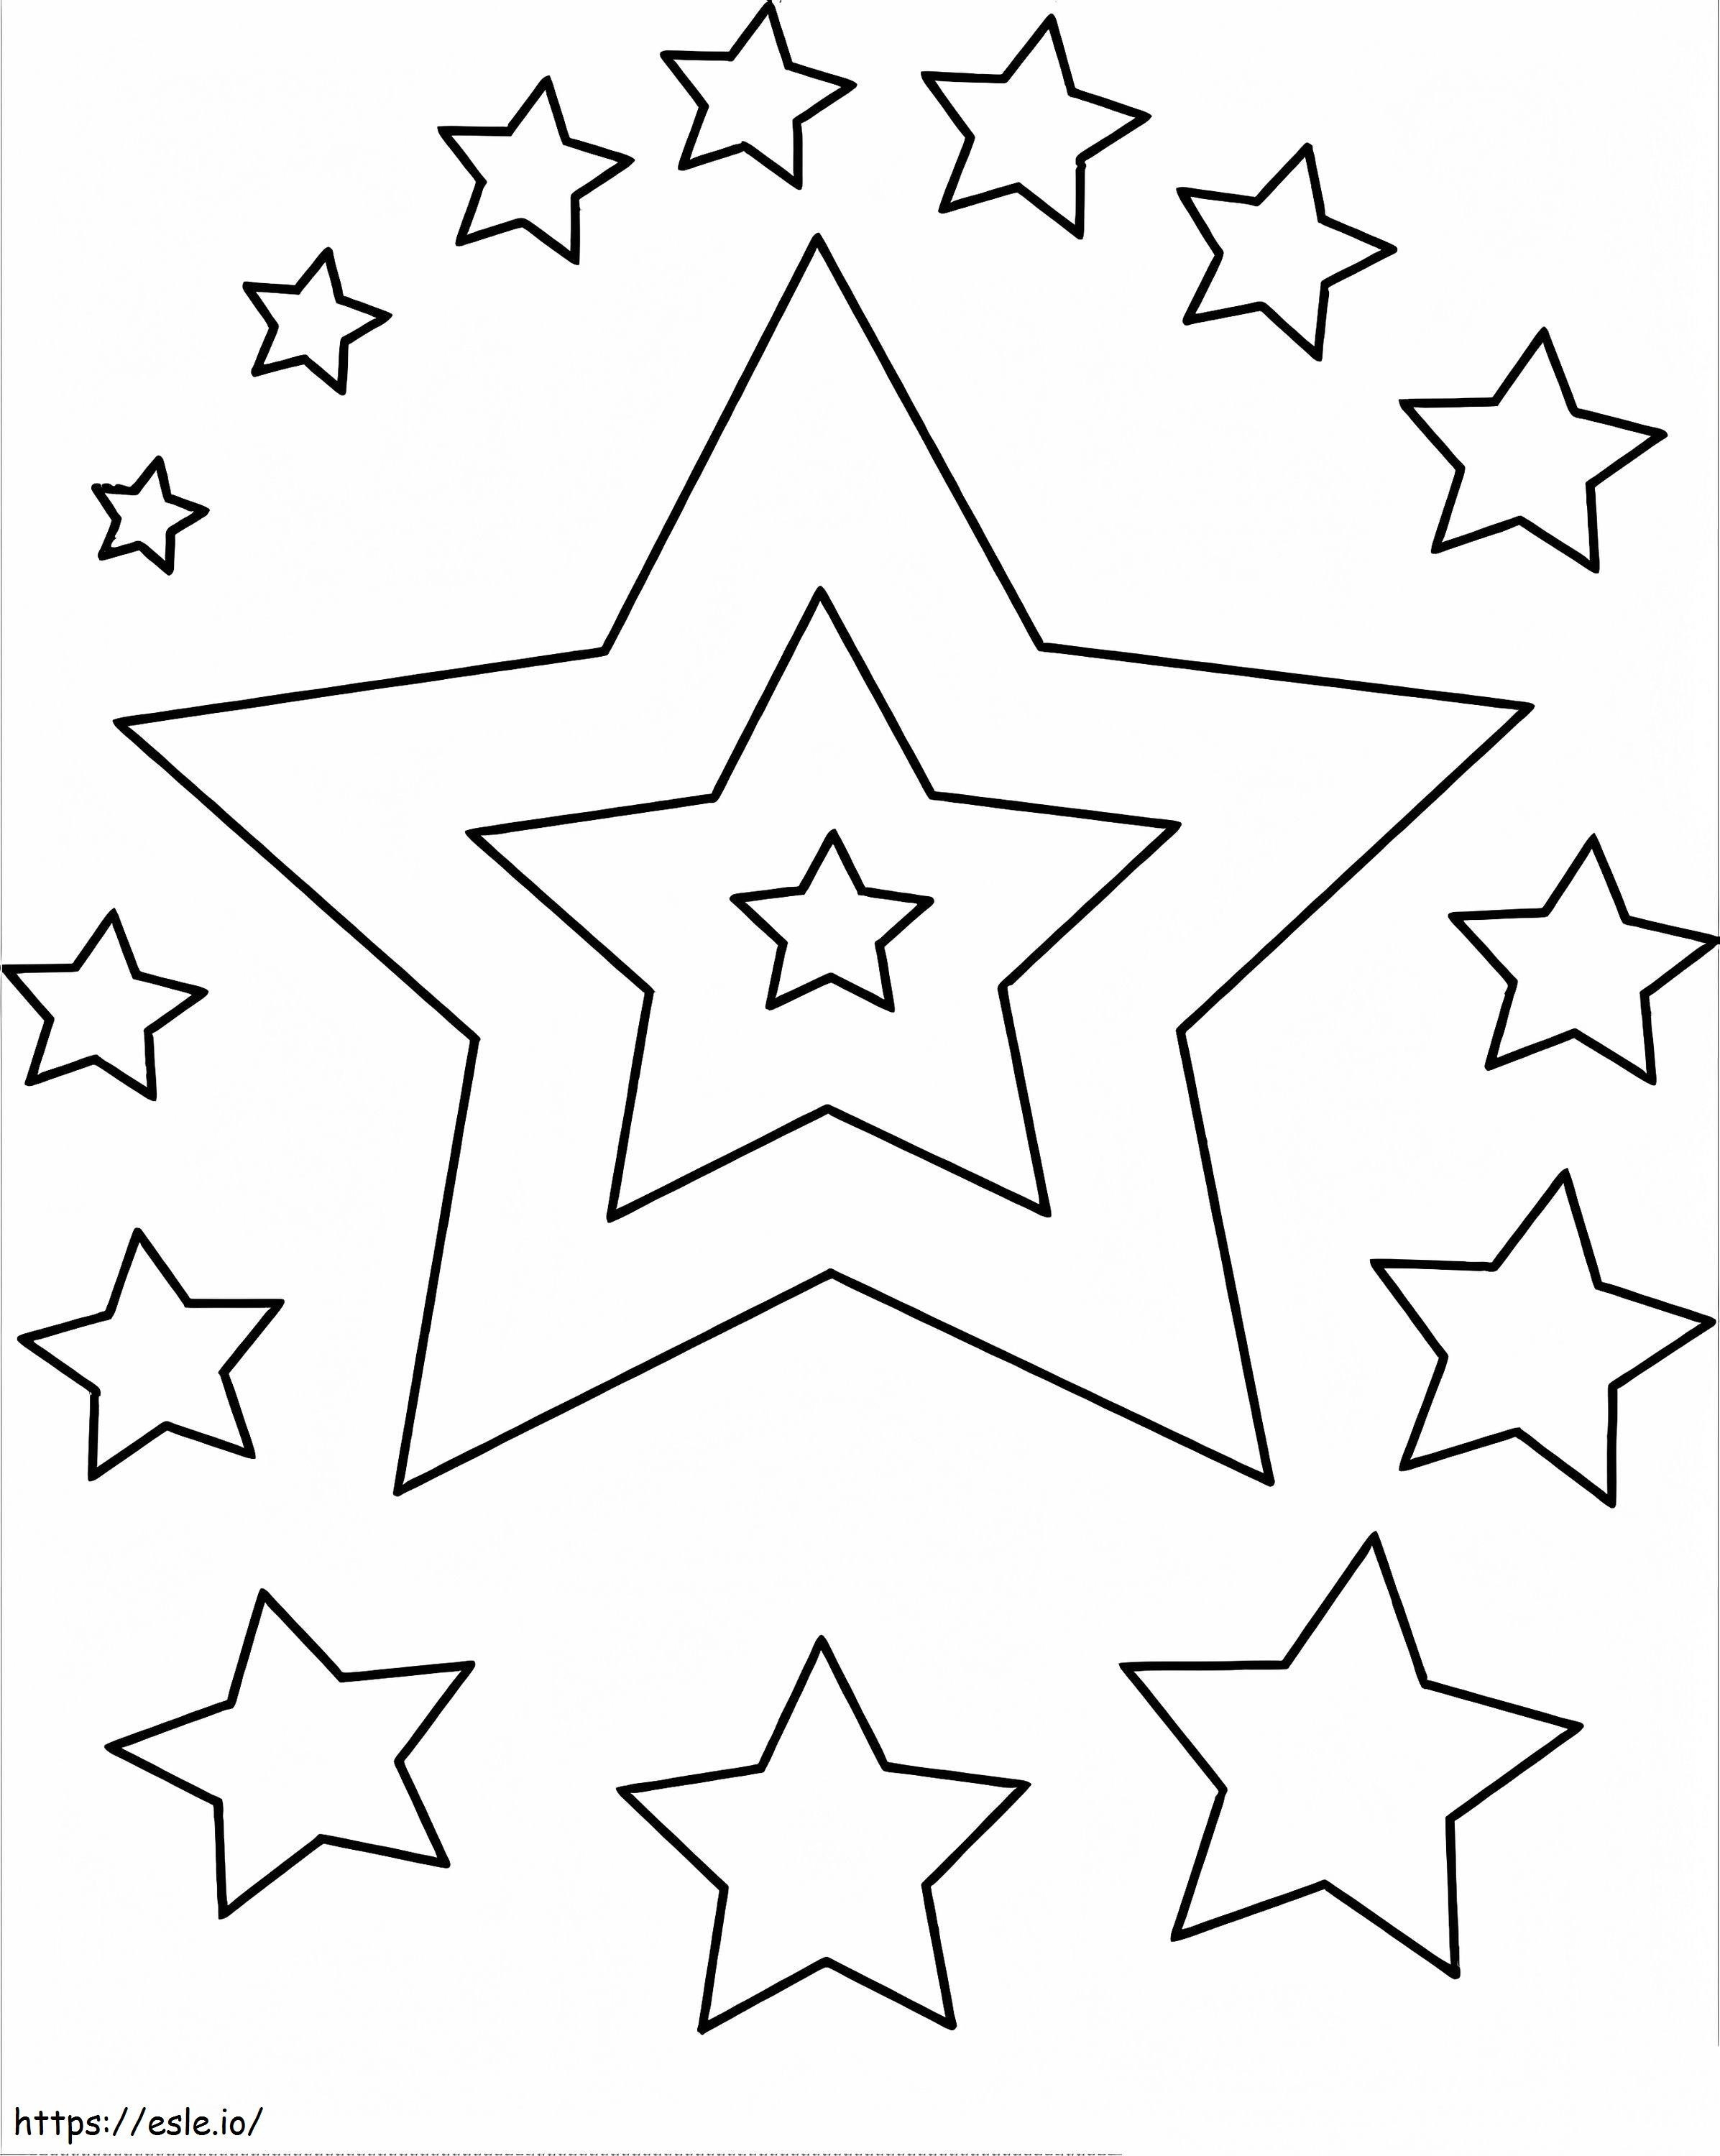 Simple Stars coloring page